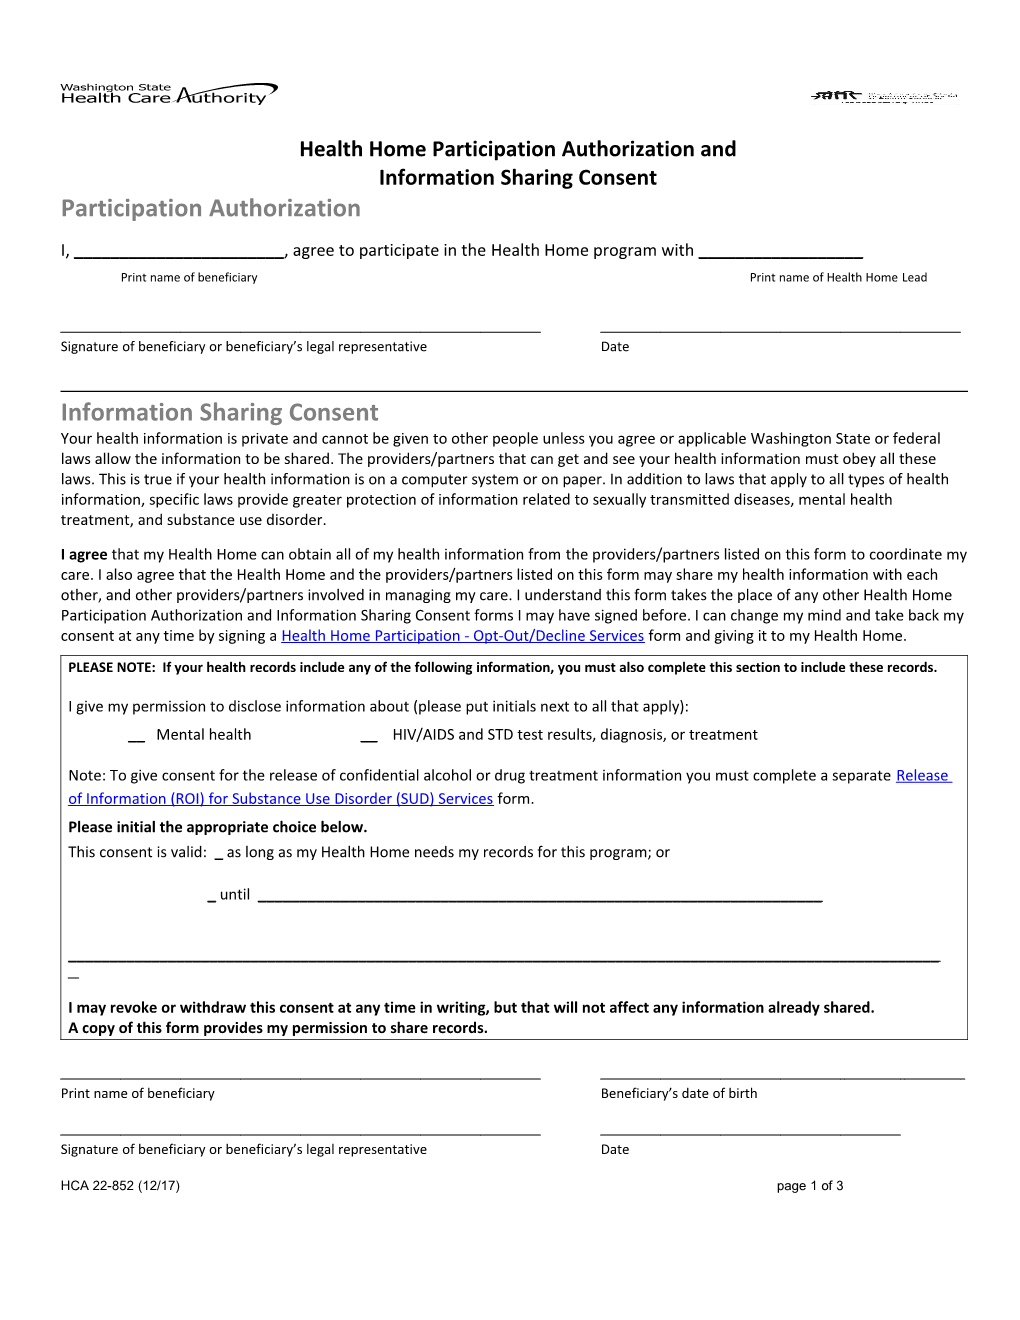 Health Home Participation Authorization and Information Sharing Consent Form